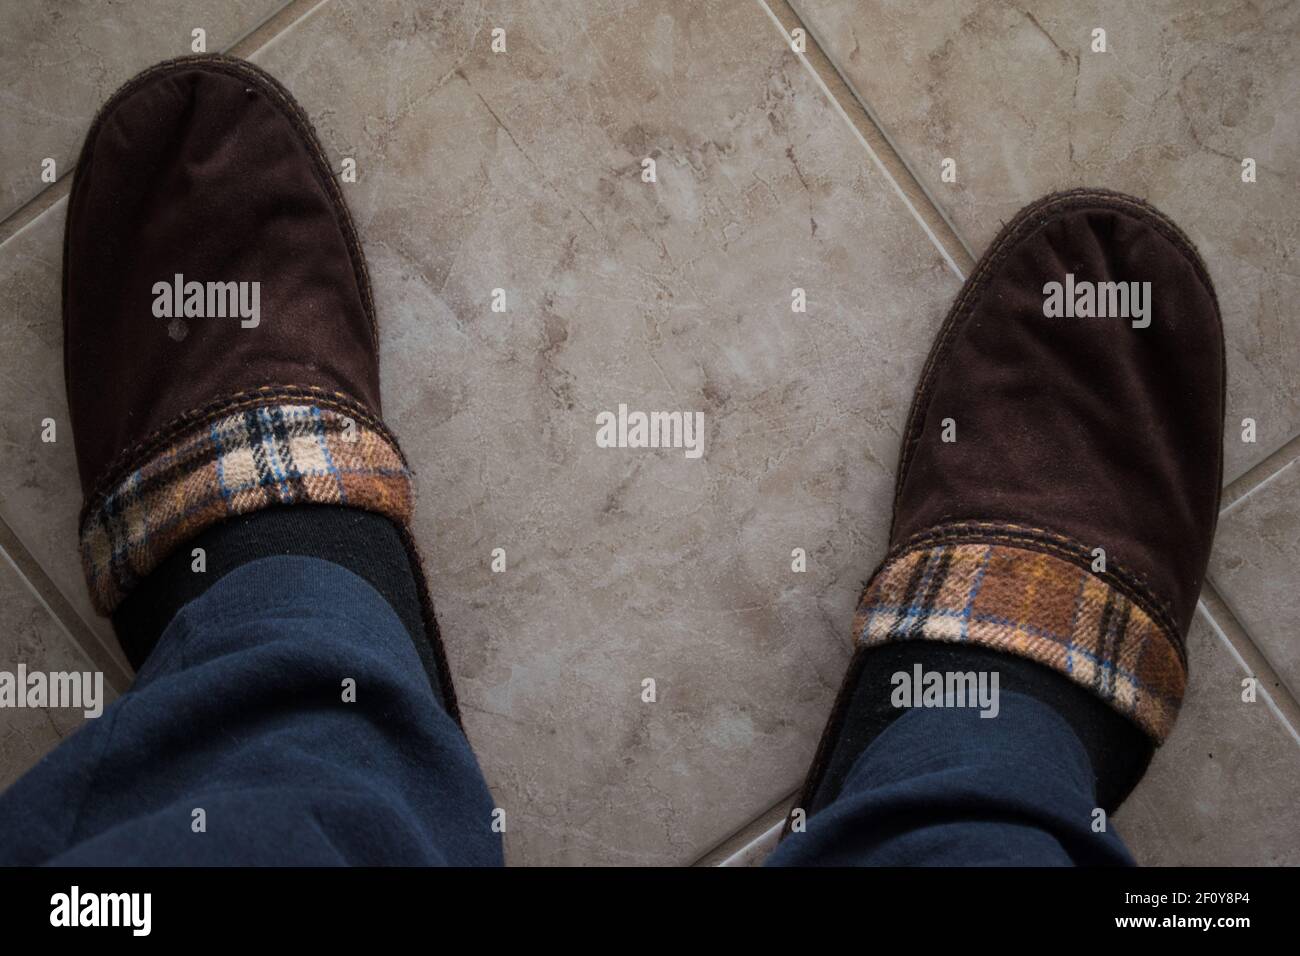 A pair of winter comfortable slippers over tiles floor. Man in warm slippers at home.Bed shoes accessory footwear.Top view Stock Photo